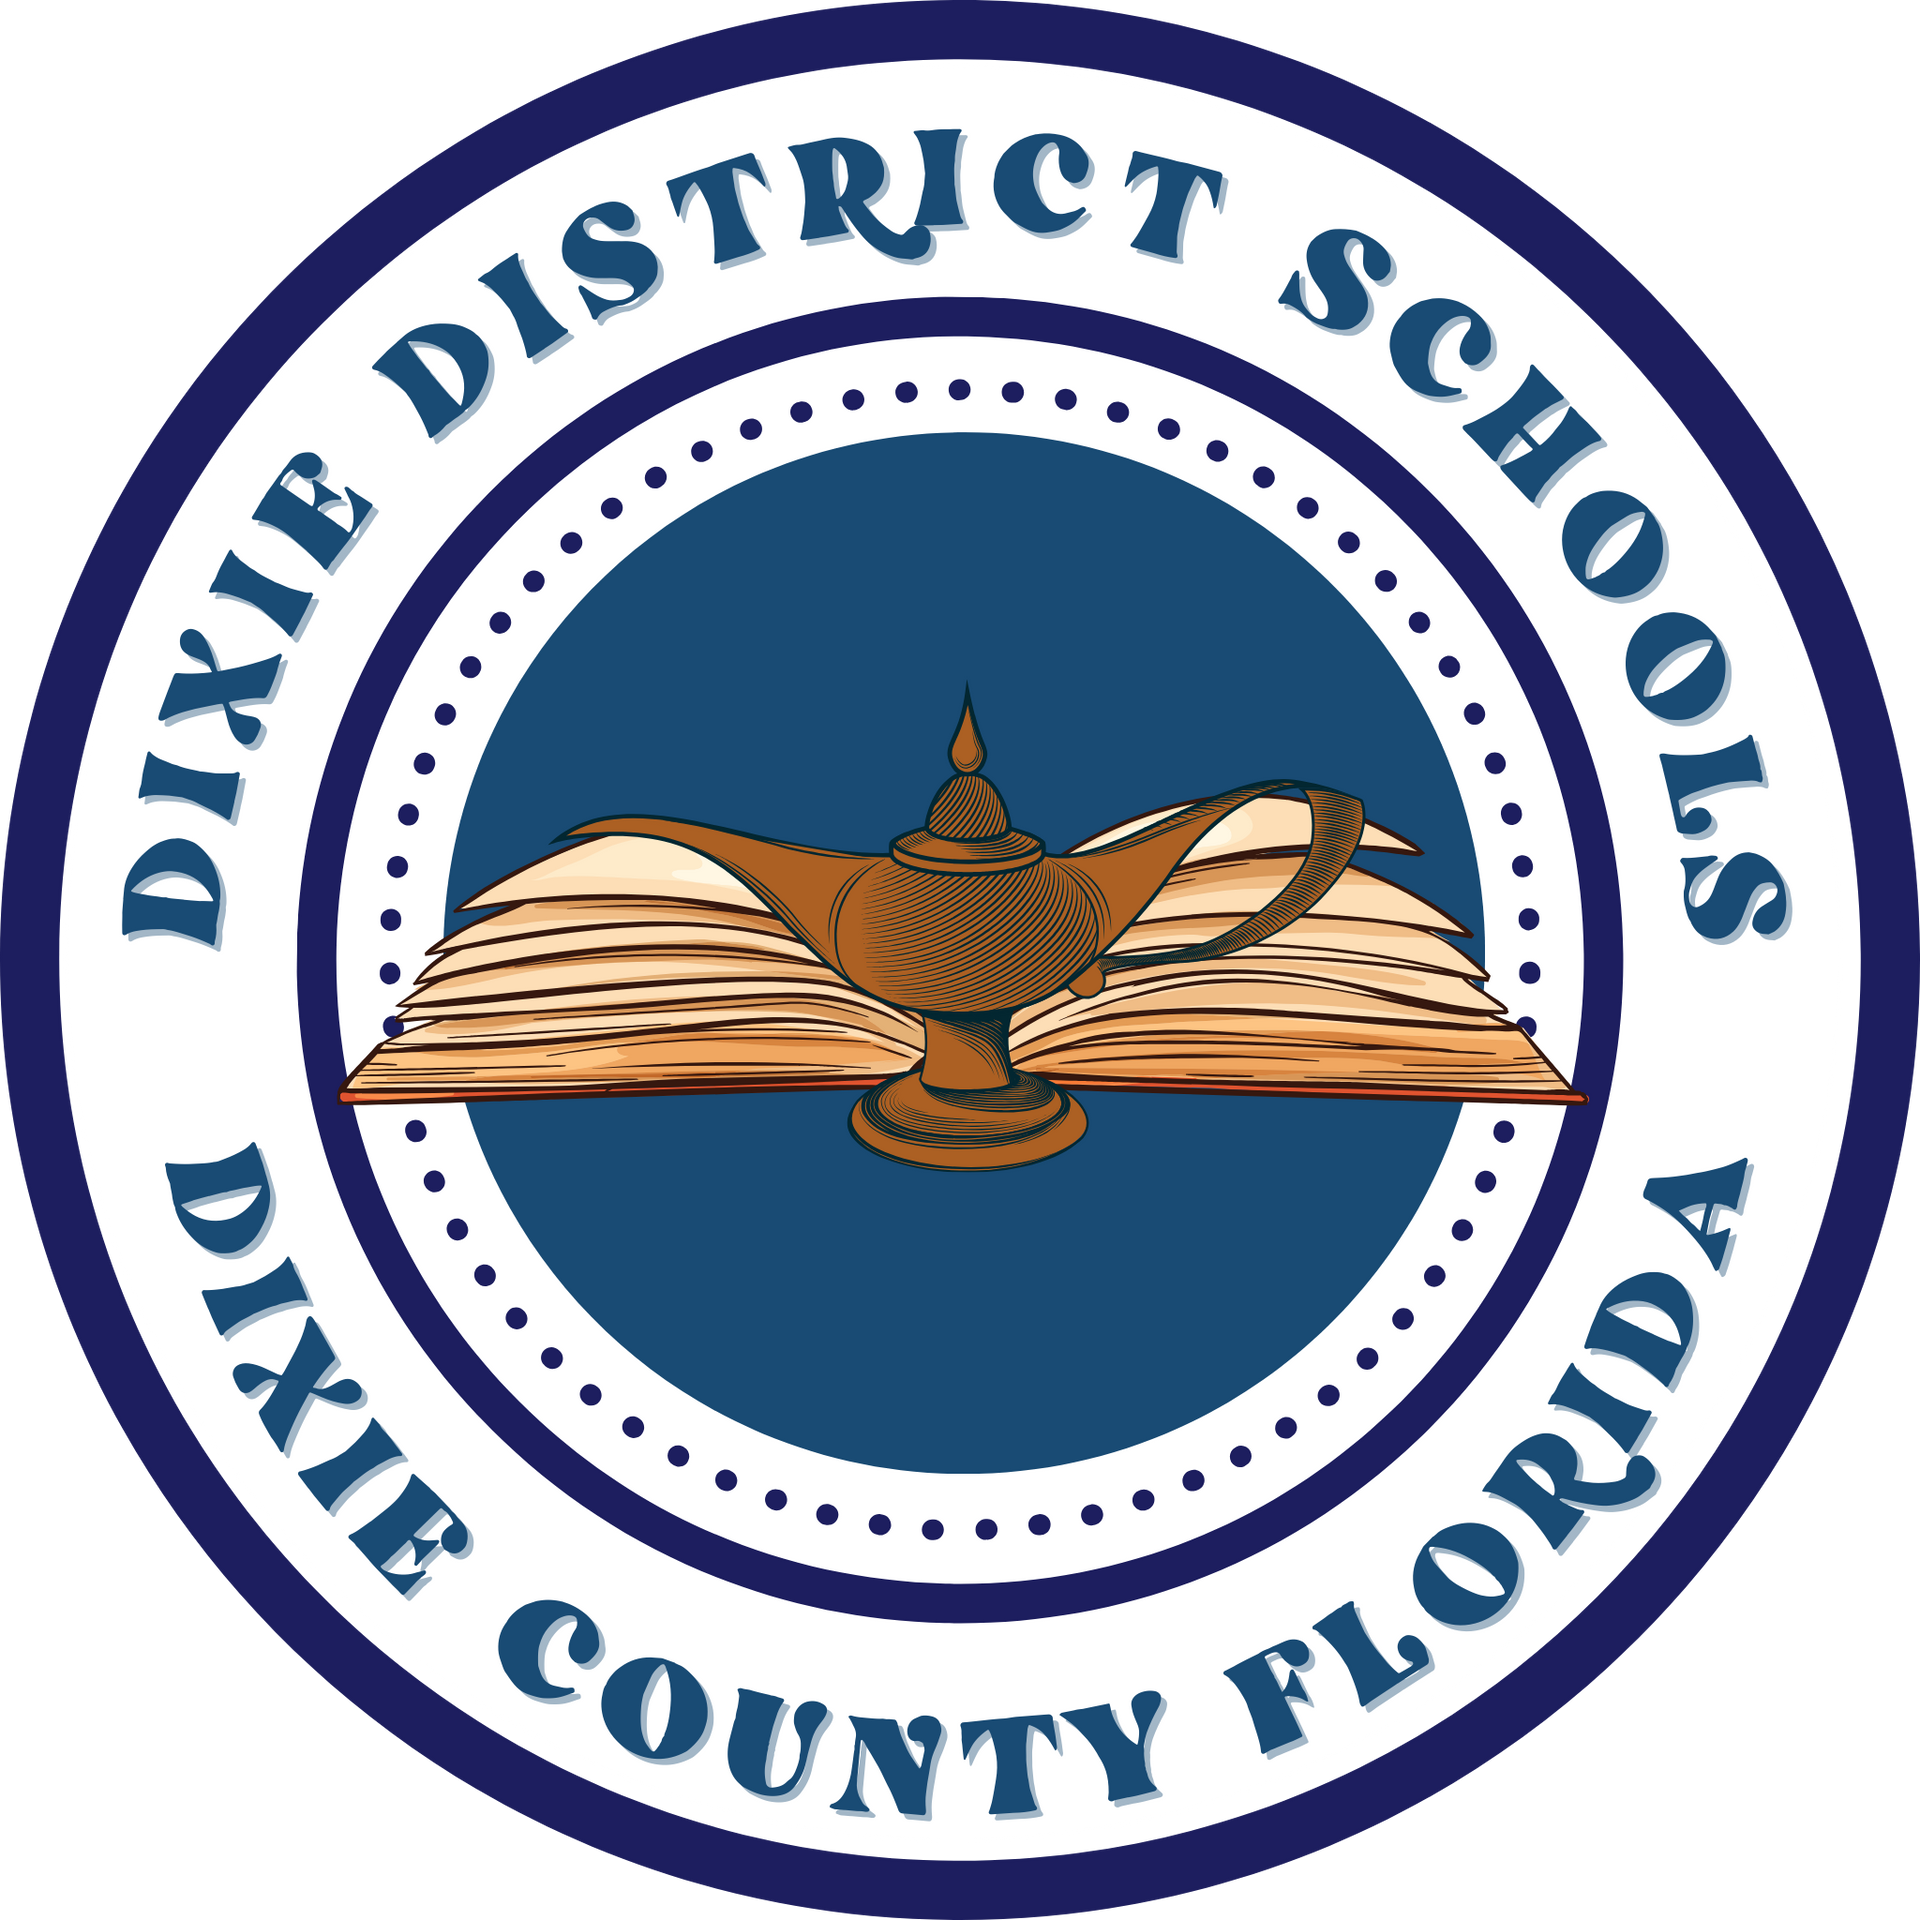 the logo for dixie district school in dixie county florida